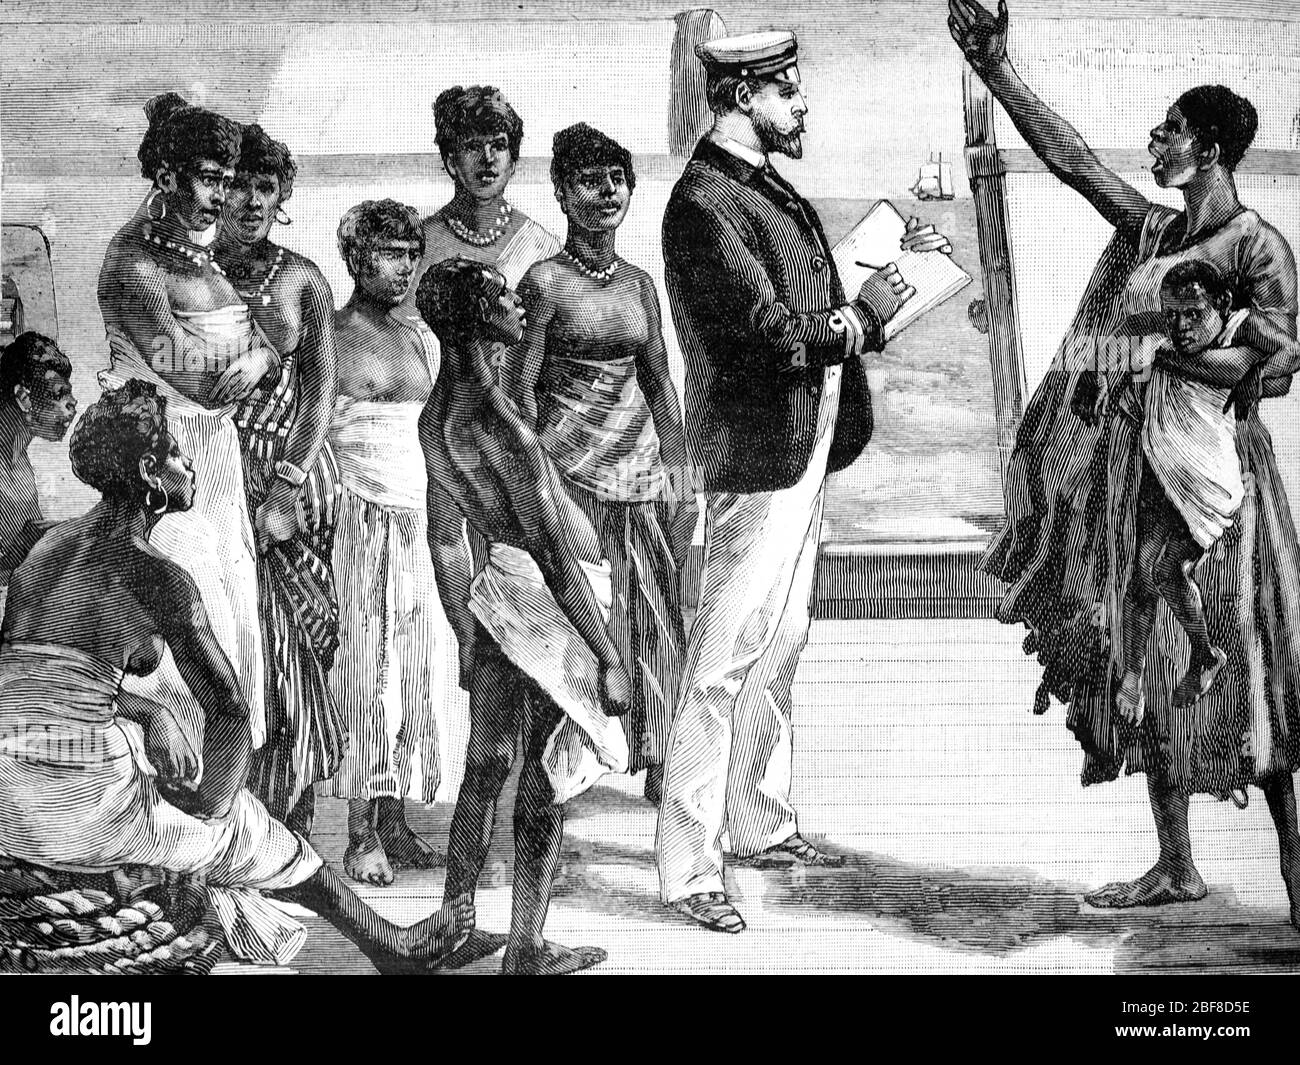 Zanzibar Slave Women Being Released from Slavery Tanzania. Vintage or Old Illustration or Engraving 1889 Stock Photo